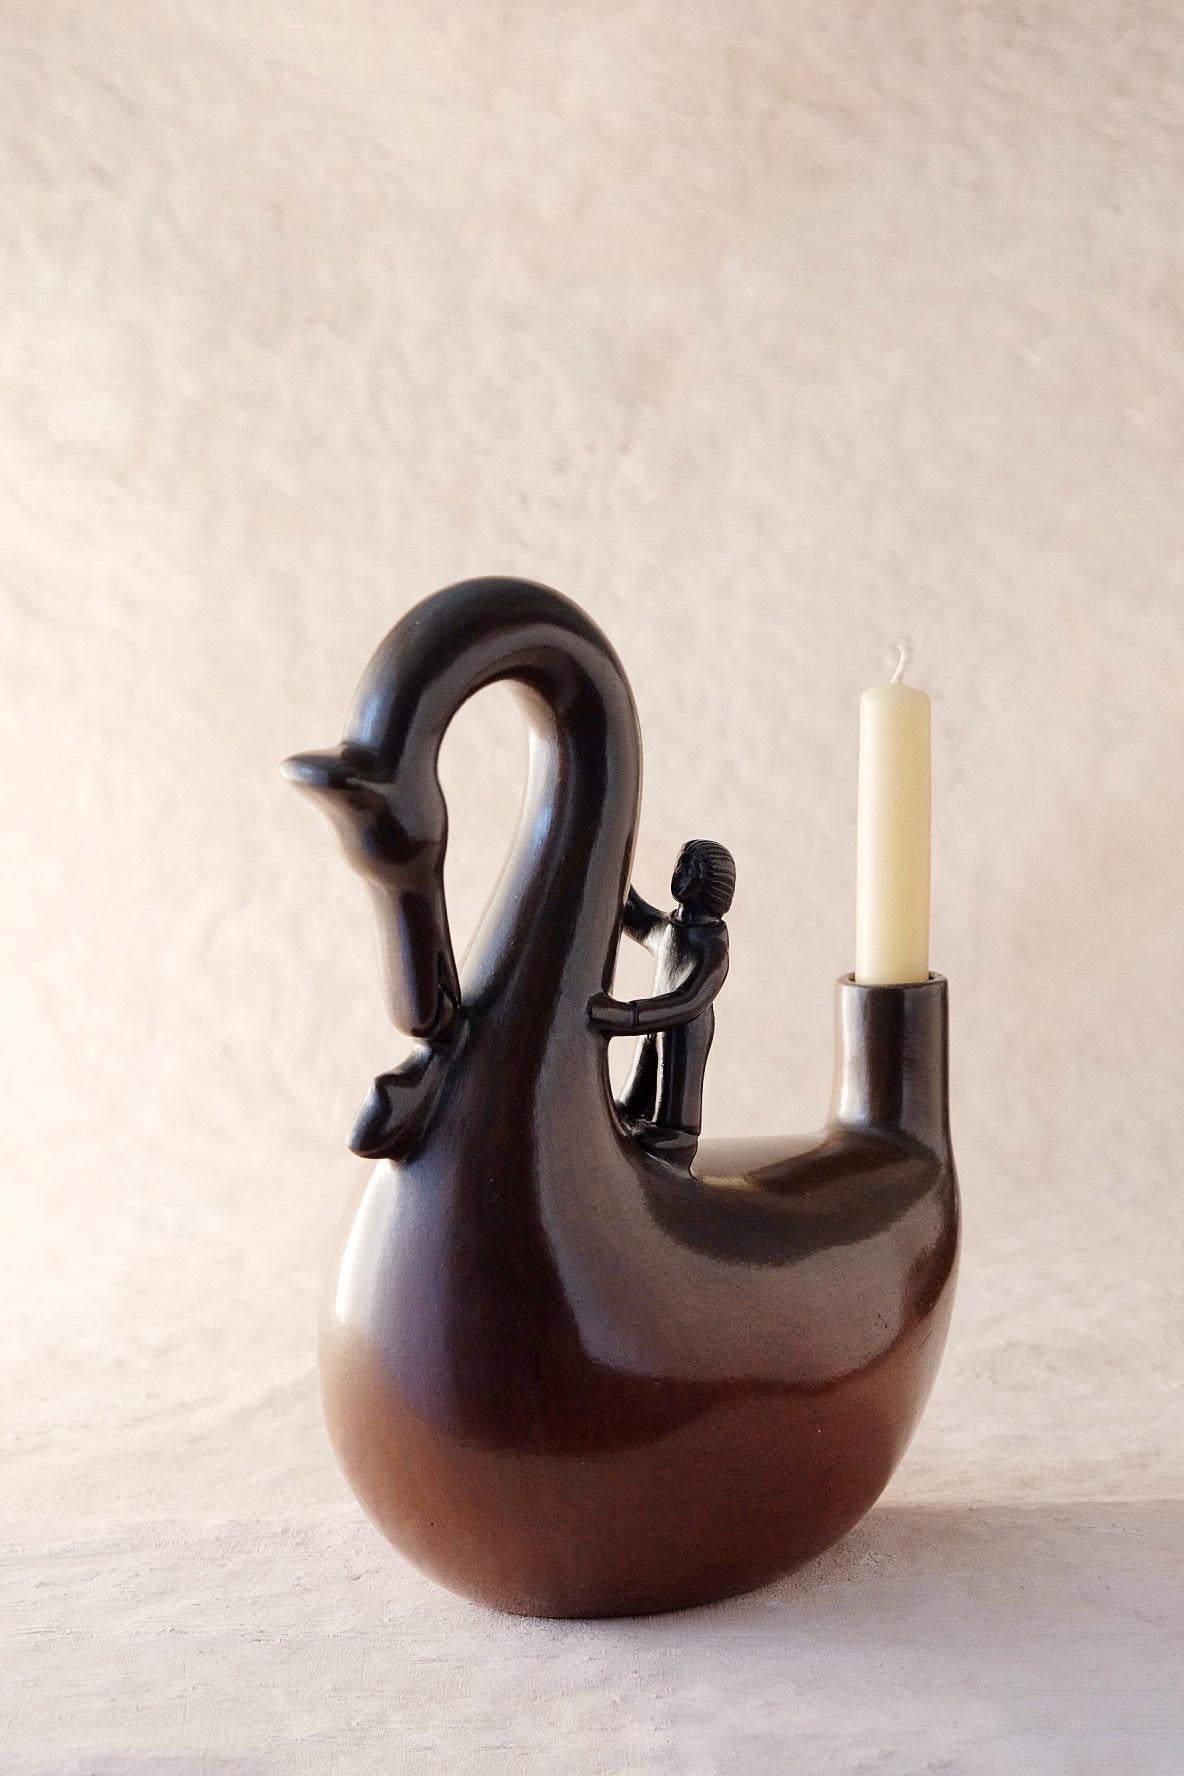 Acatlán Tototl Candleholder by Onora
Dimensions: W 25 x D 12 x H 28 cm
Materials: Clay, Quartz stone

Hand sculpted clay, covered with a mineral based slip and burnished using a quartz stone. 

We are a Mexican brand dedicated to the creation